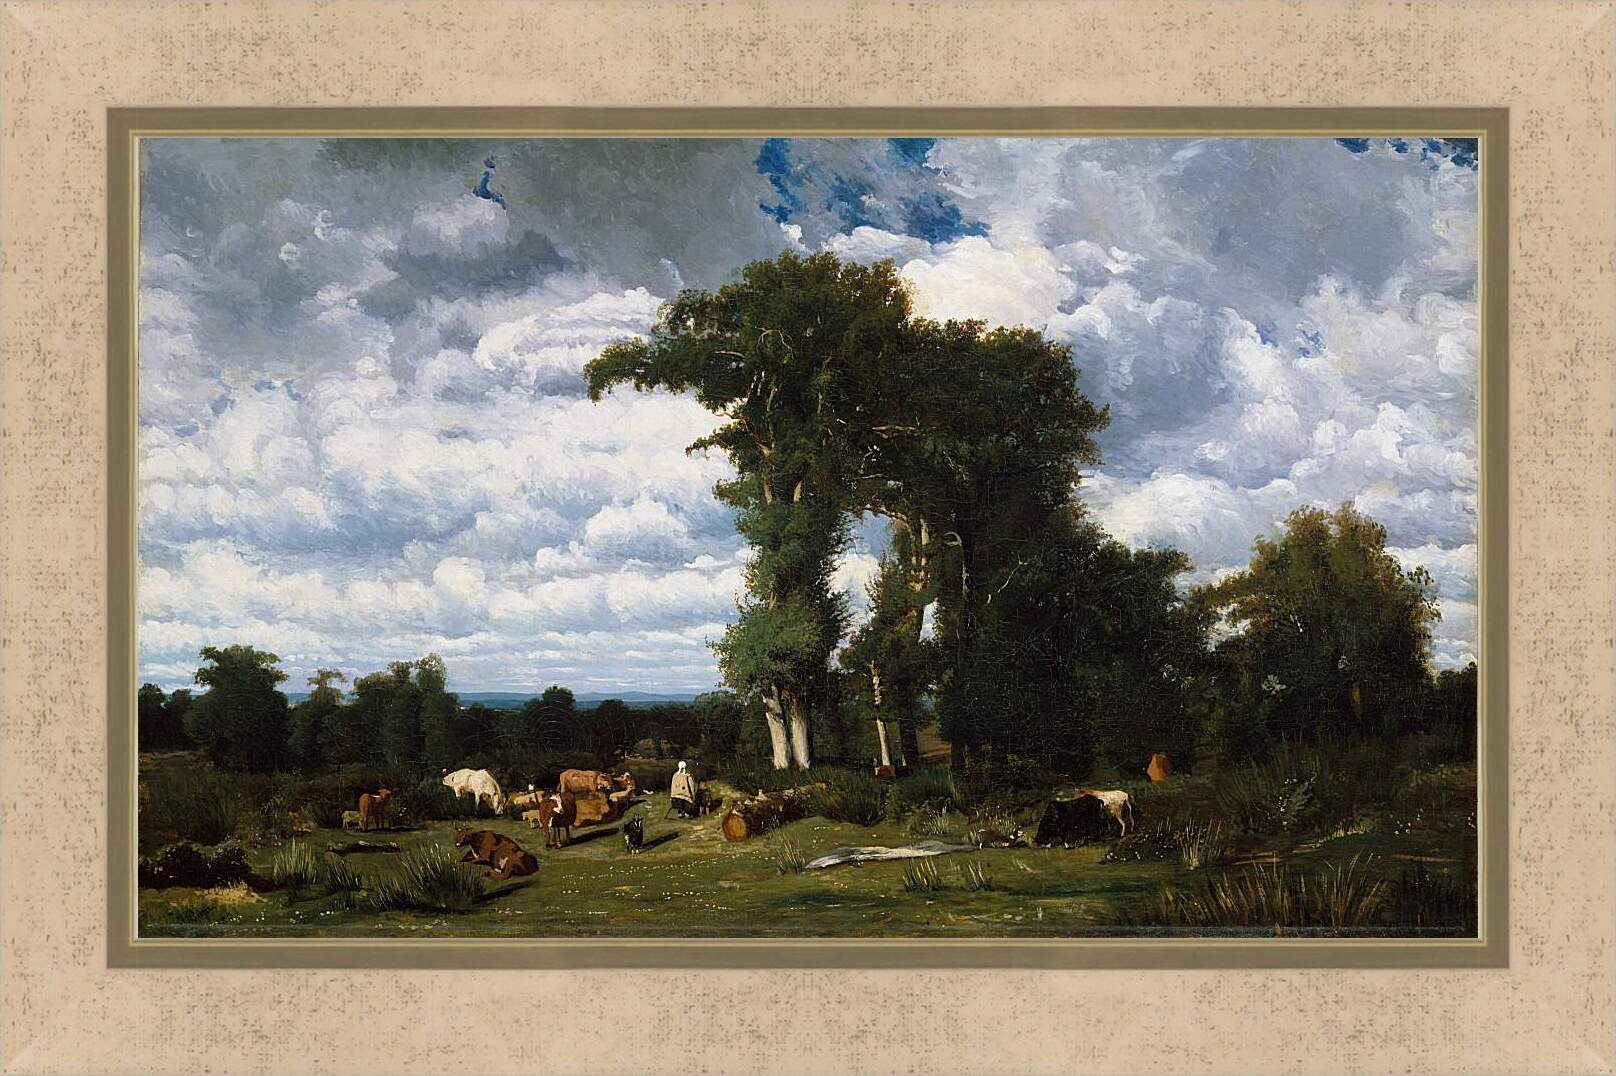 Картина в раме - Landscape with Cattle at Limousin. Жюль Дюпре